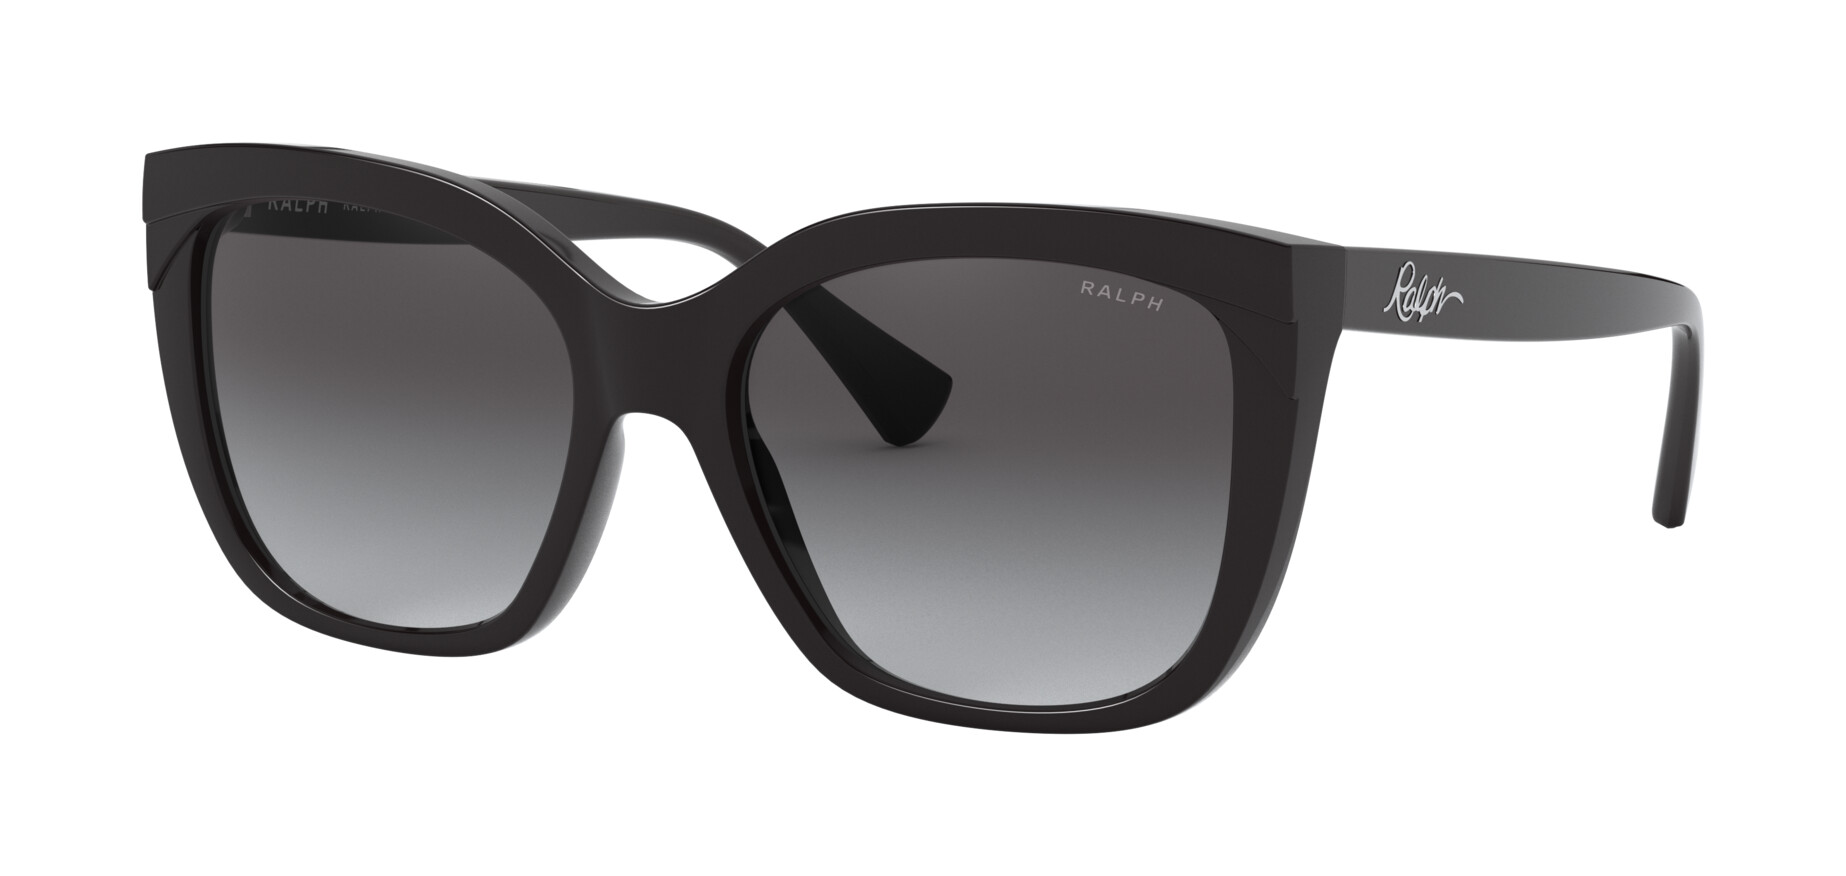 [products.image.angle_left01] Ralph Lauren 0RA5265 575225 Sonnenbrille